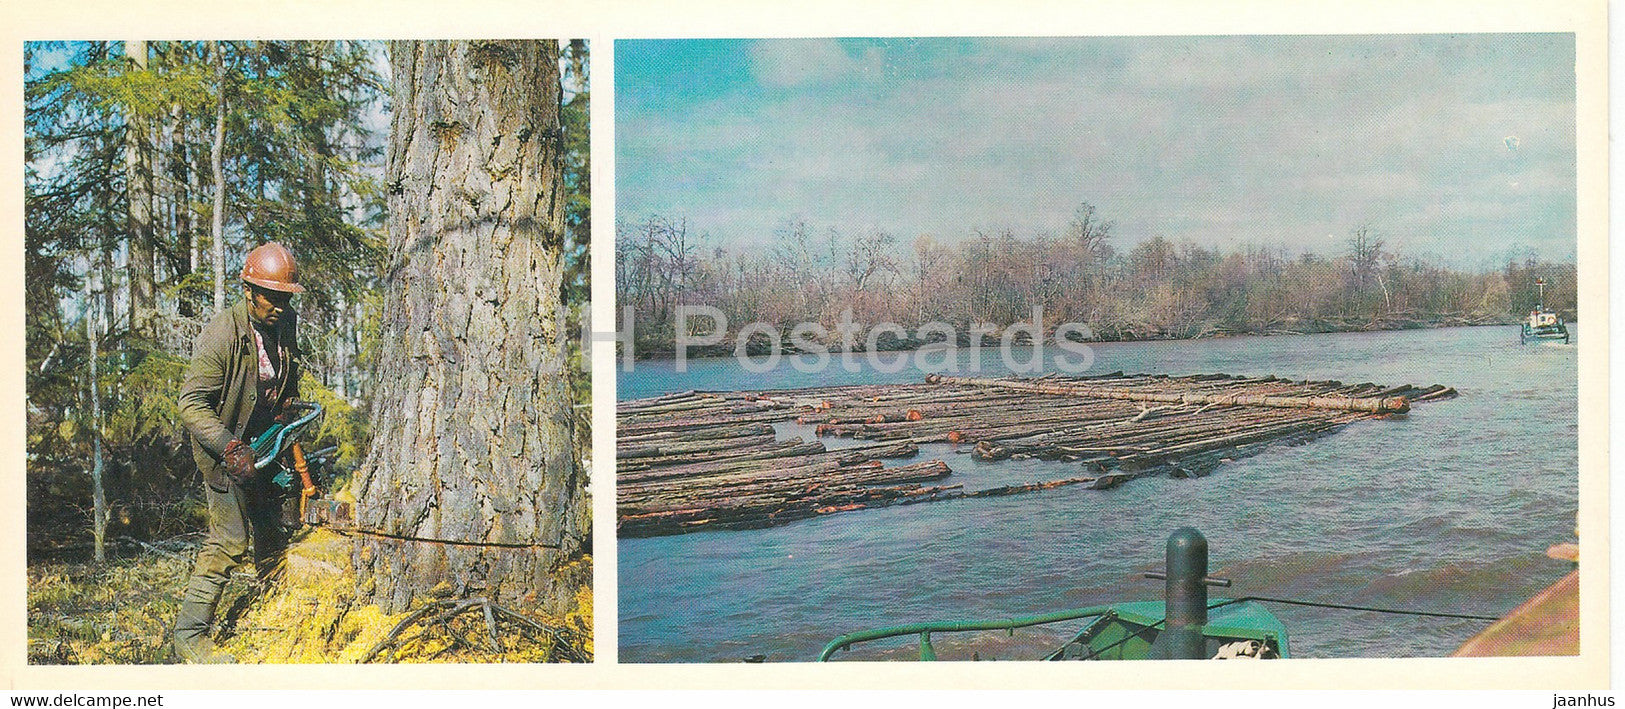 Kamchatka - rafting on the Kamchatka river - forester - chainsaw - 1981 - Russia USSR - unused - JH Postcards